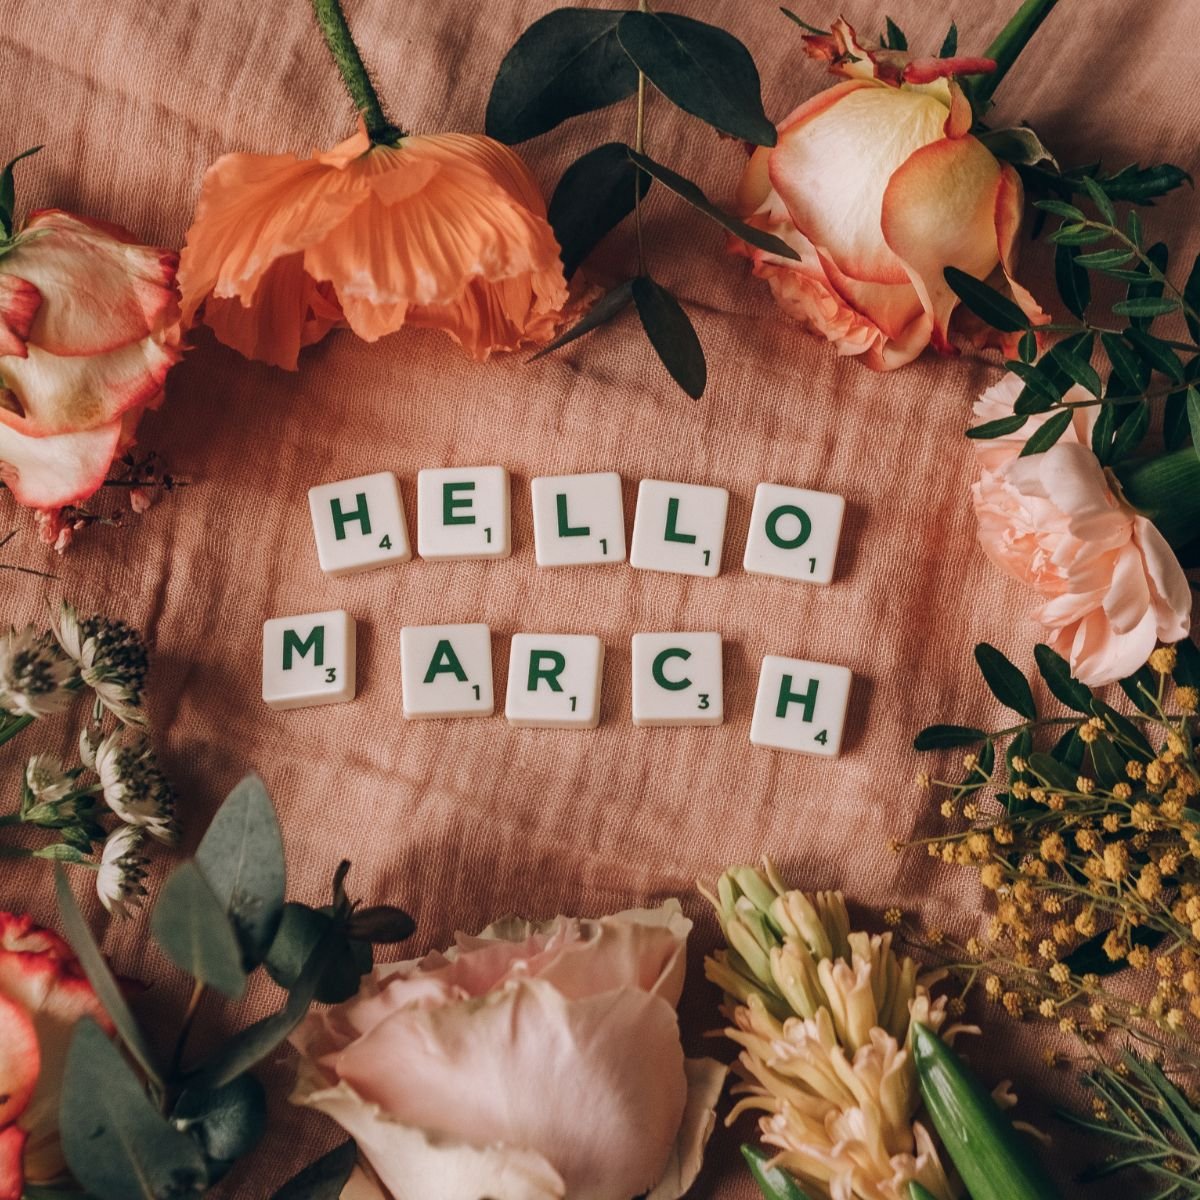 Flowers surrounding scrabble tiles that say "Hello March"